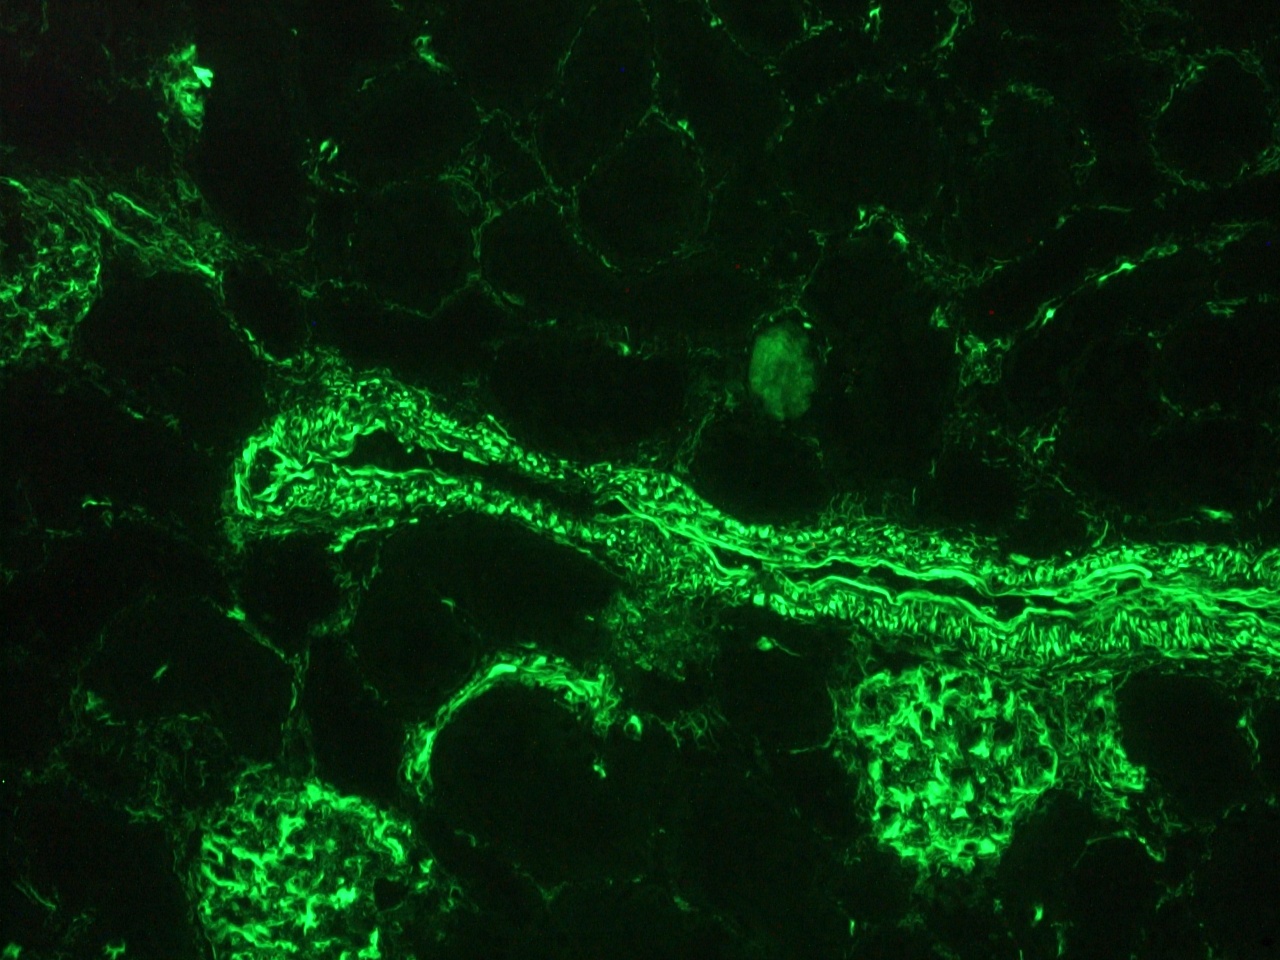 Figure 3. Immunohistochemistry with RV203 on a frozen section of human kidney showing positive staining in blood vessels, glomeruli and connective tissue cells and no reactivity in epithelial cells.